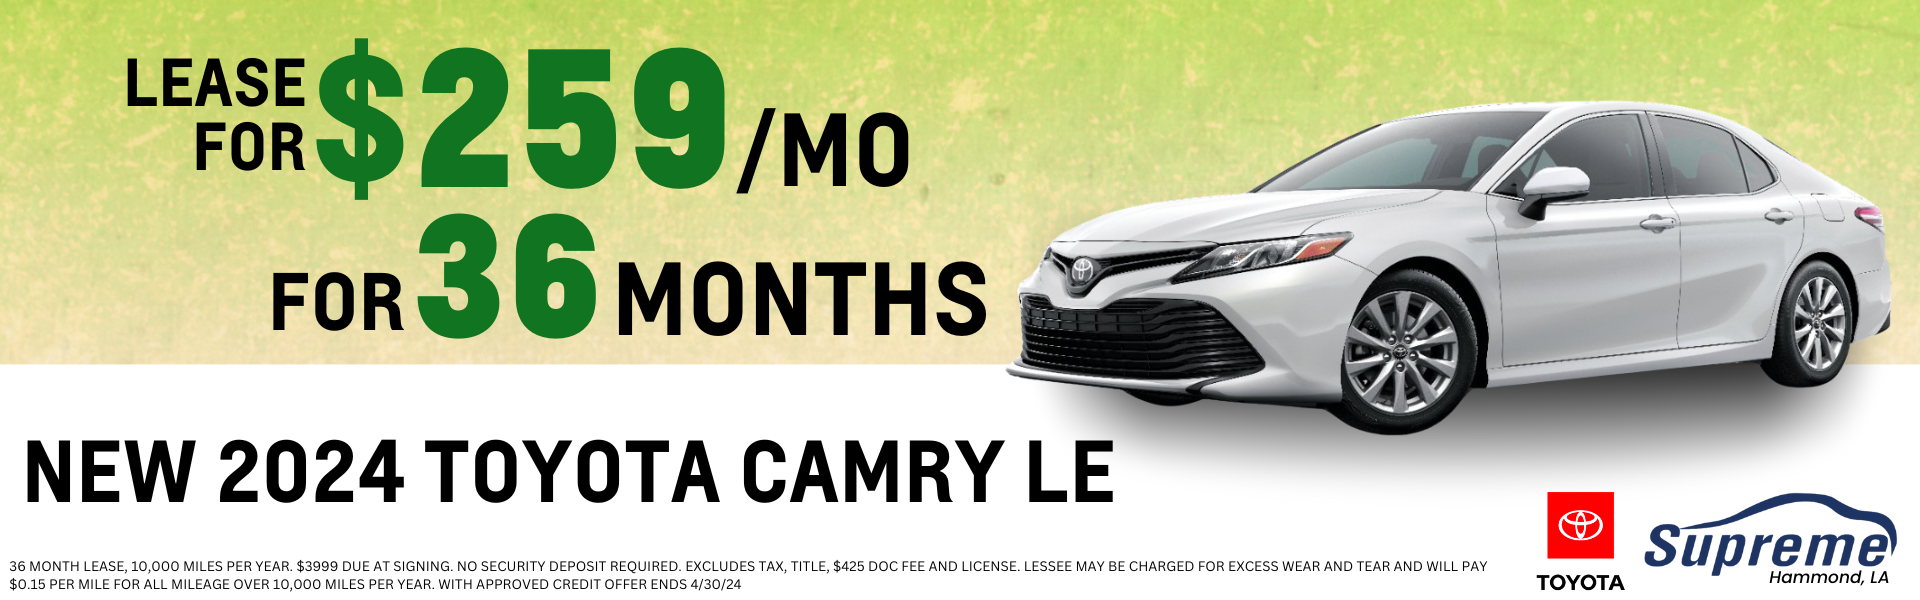 NEW 2024 TOYOTA CAMRY LE